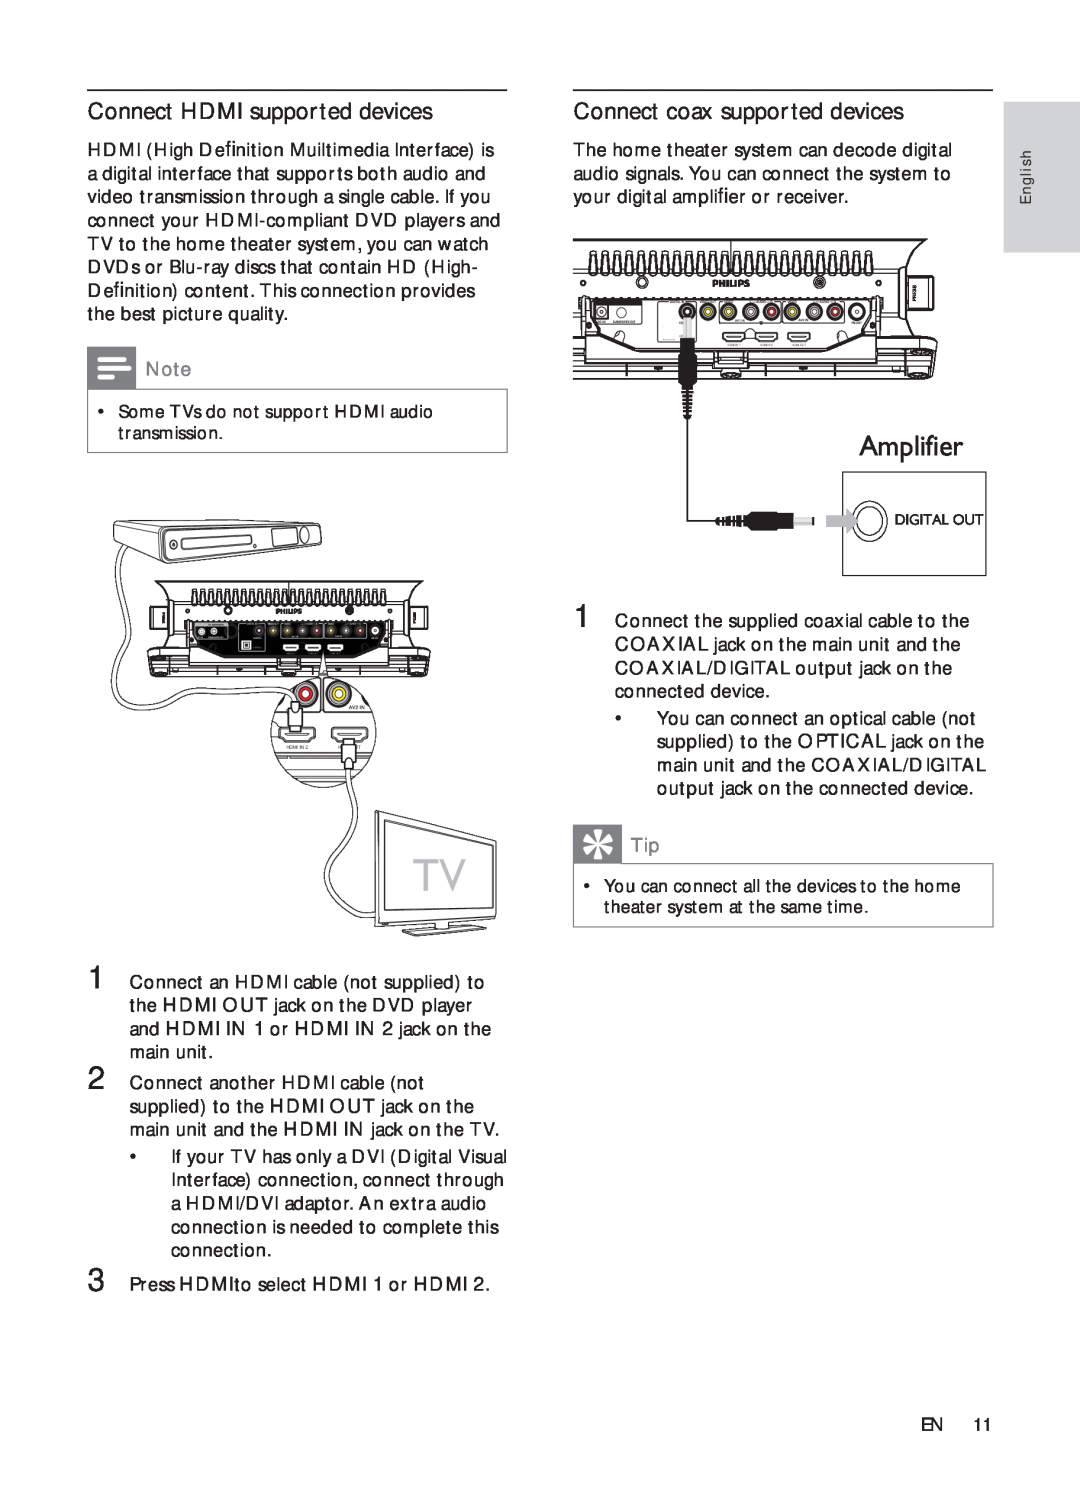 Philips HSB2313A user manual Amplifier, Connect HDMI supported devices, Connect coax supported devices 